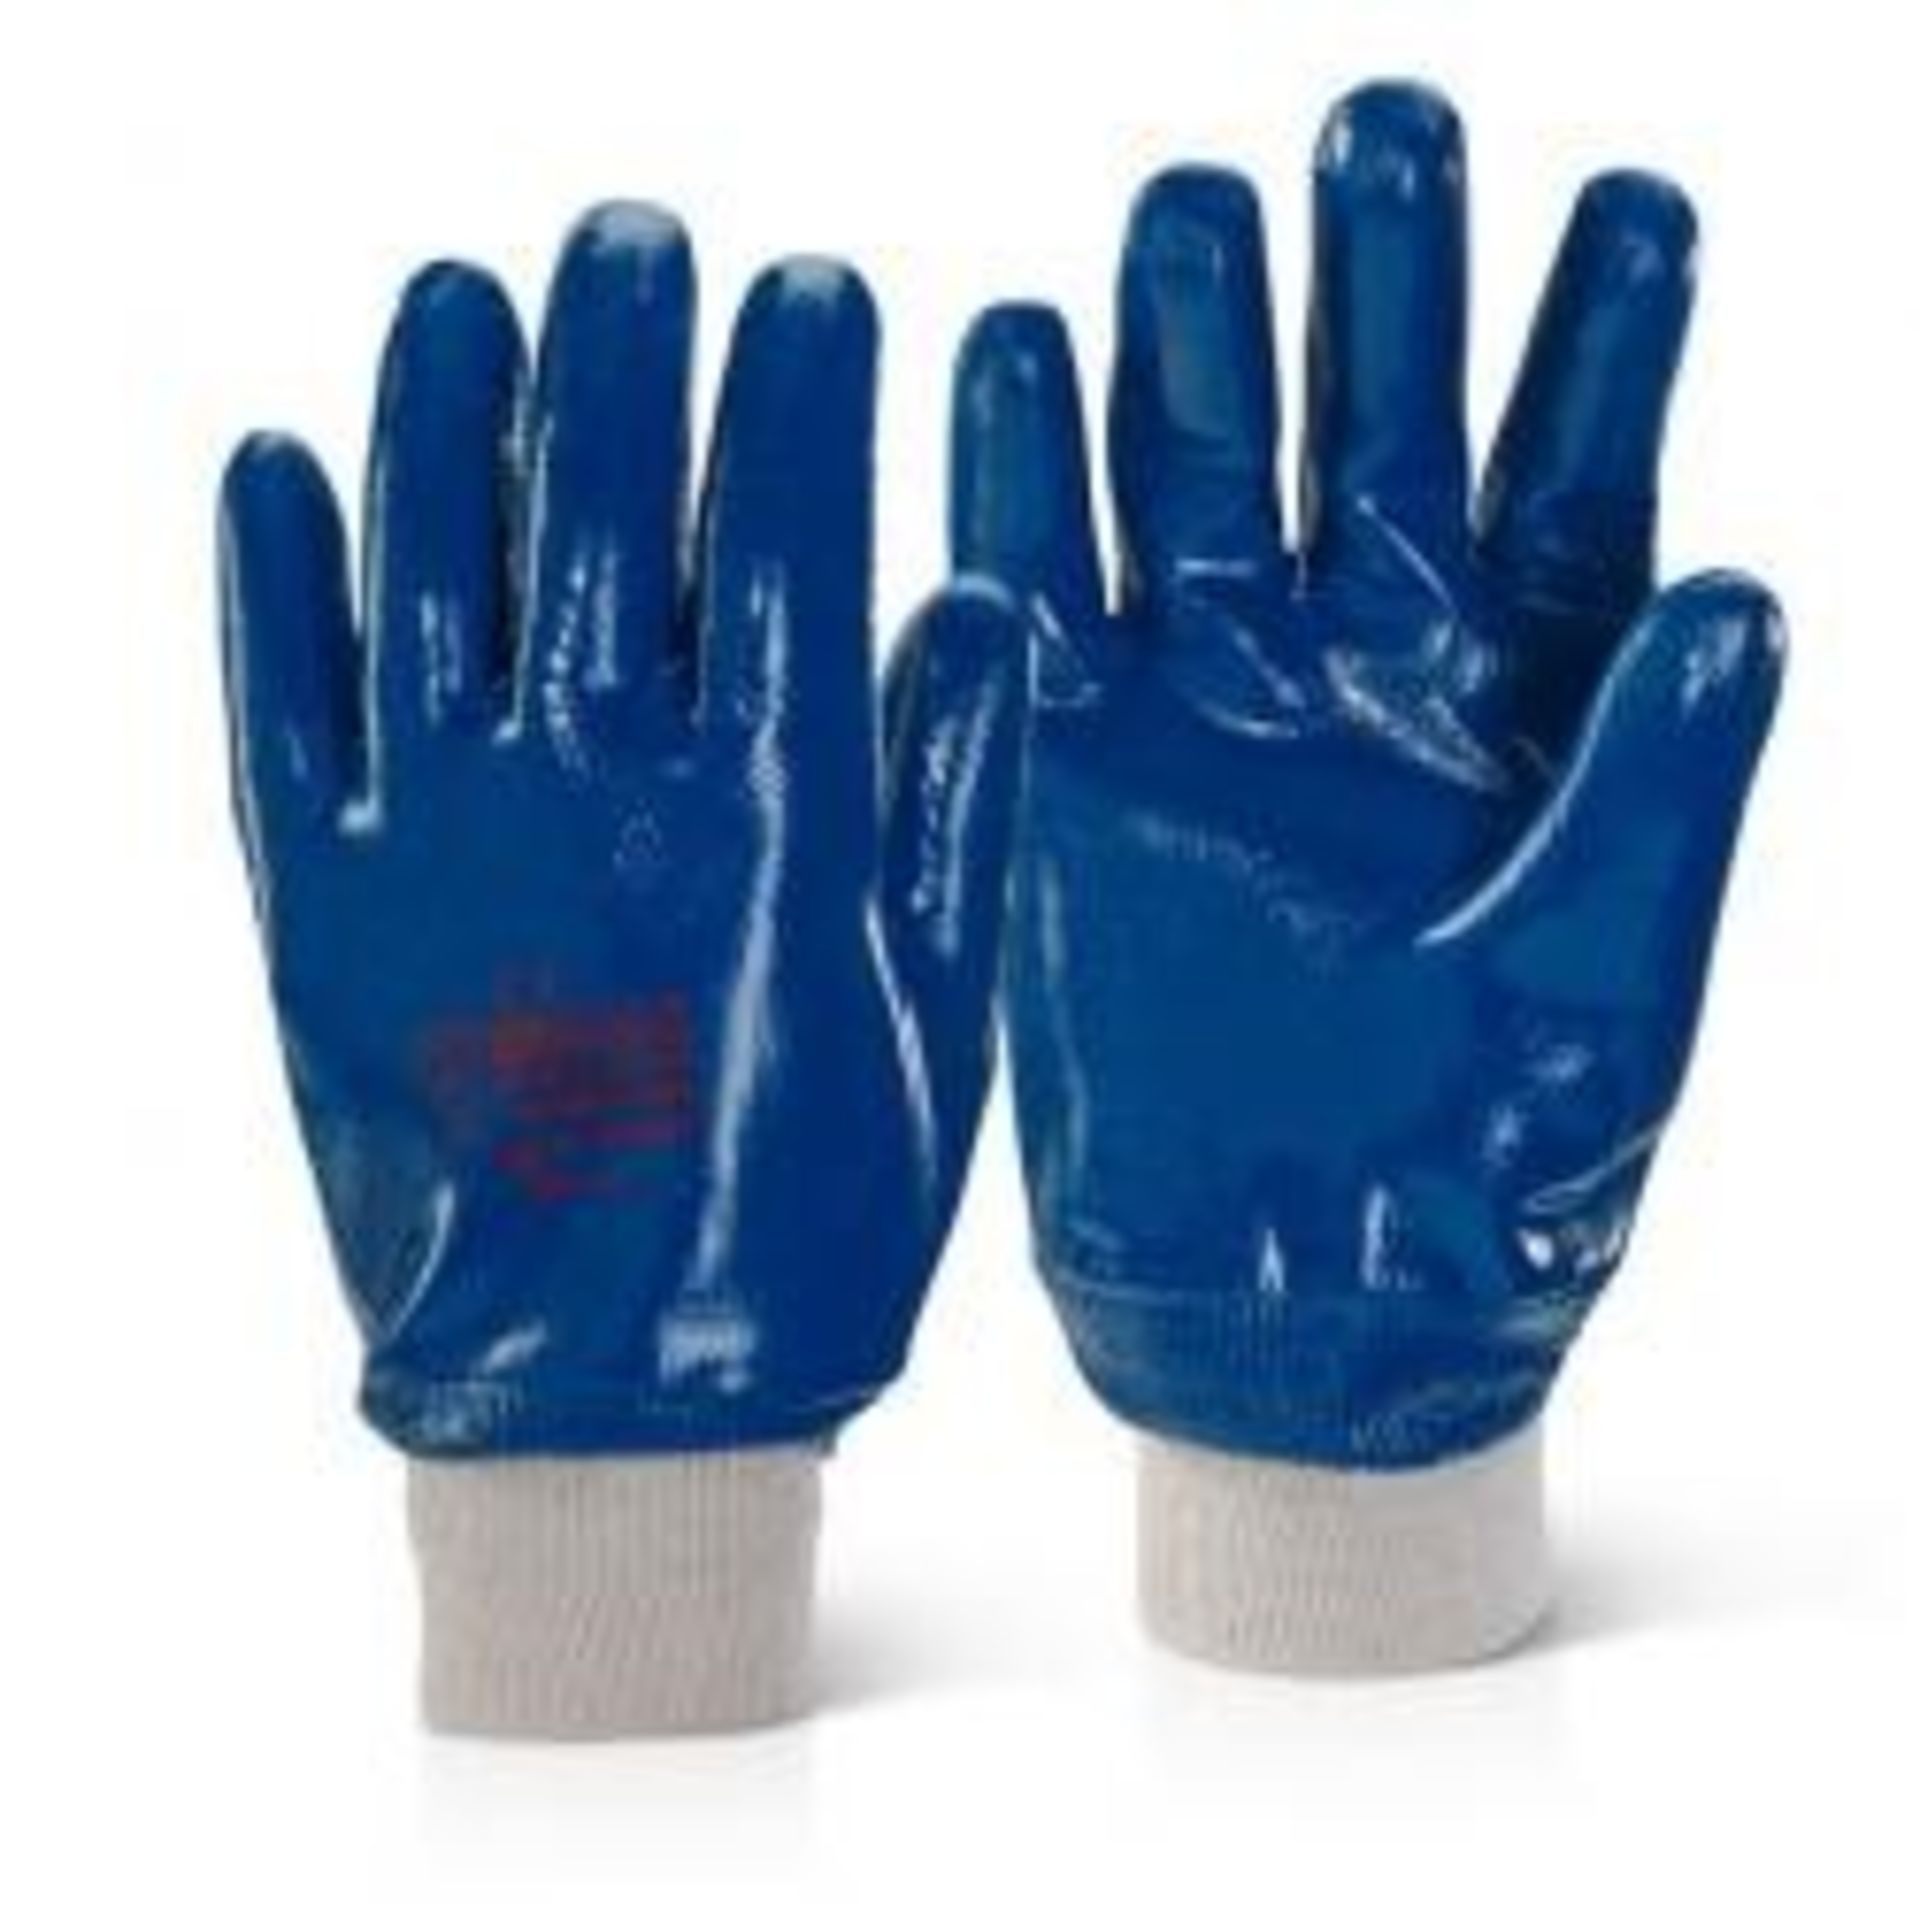 1 AS NEW BOXED CLICK-2000 NITRILE COATED KNITWRIST HEAVY 10 GLOVES - BOX OF 100 - P/N 70 / RRP £